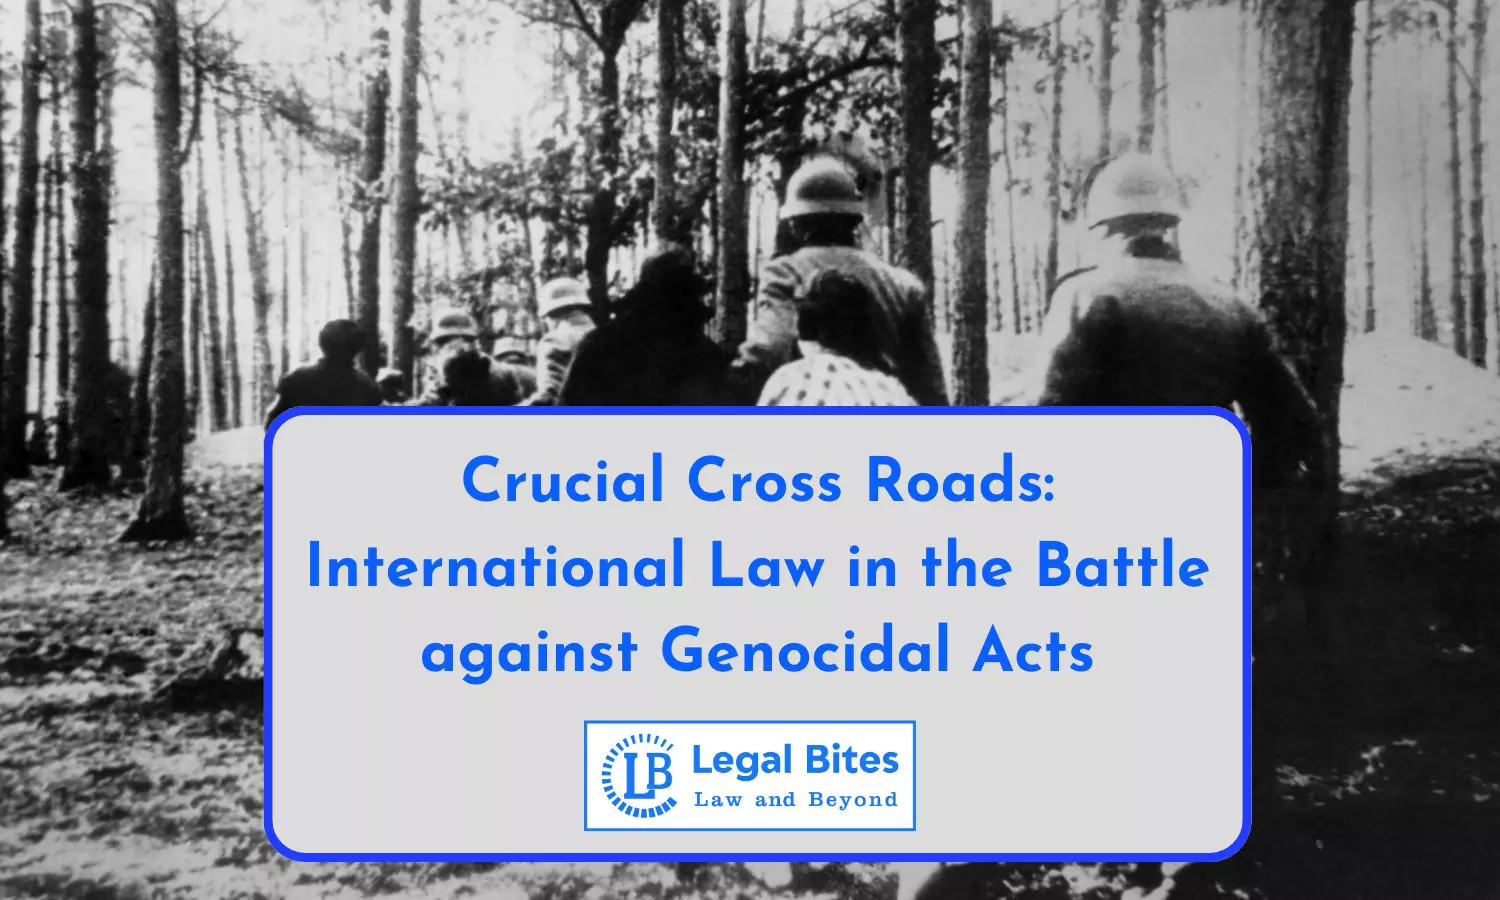 Crucial Cross Roads: International Law in the Battle against Genocidal Acts